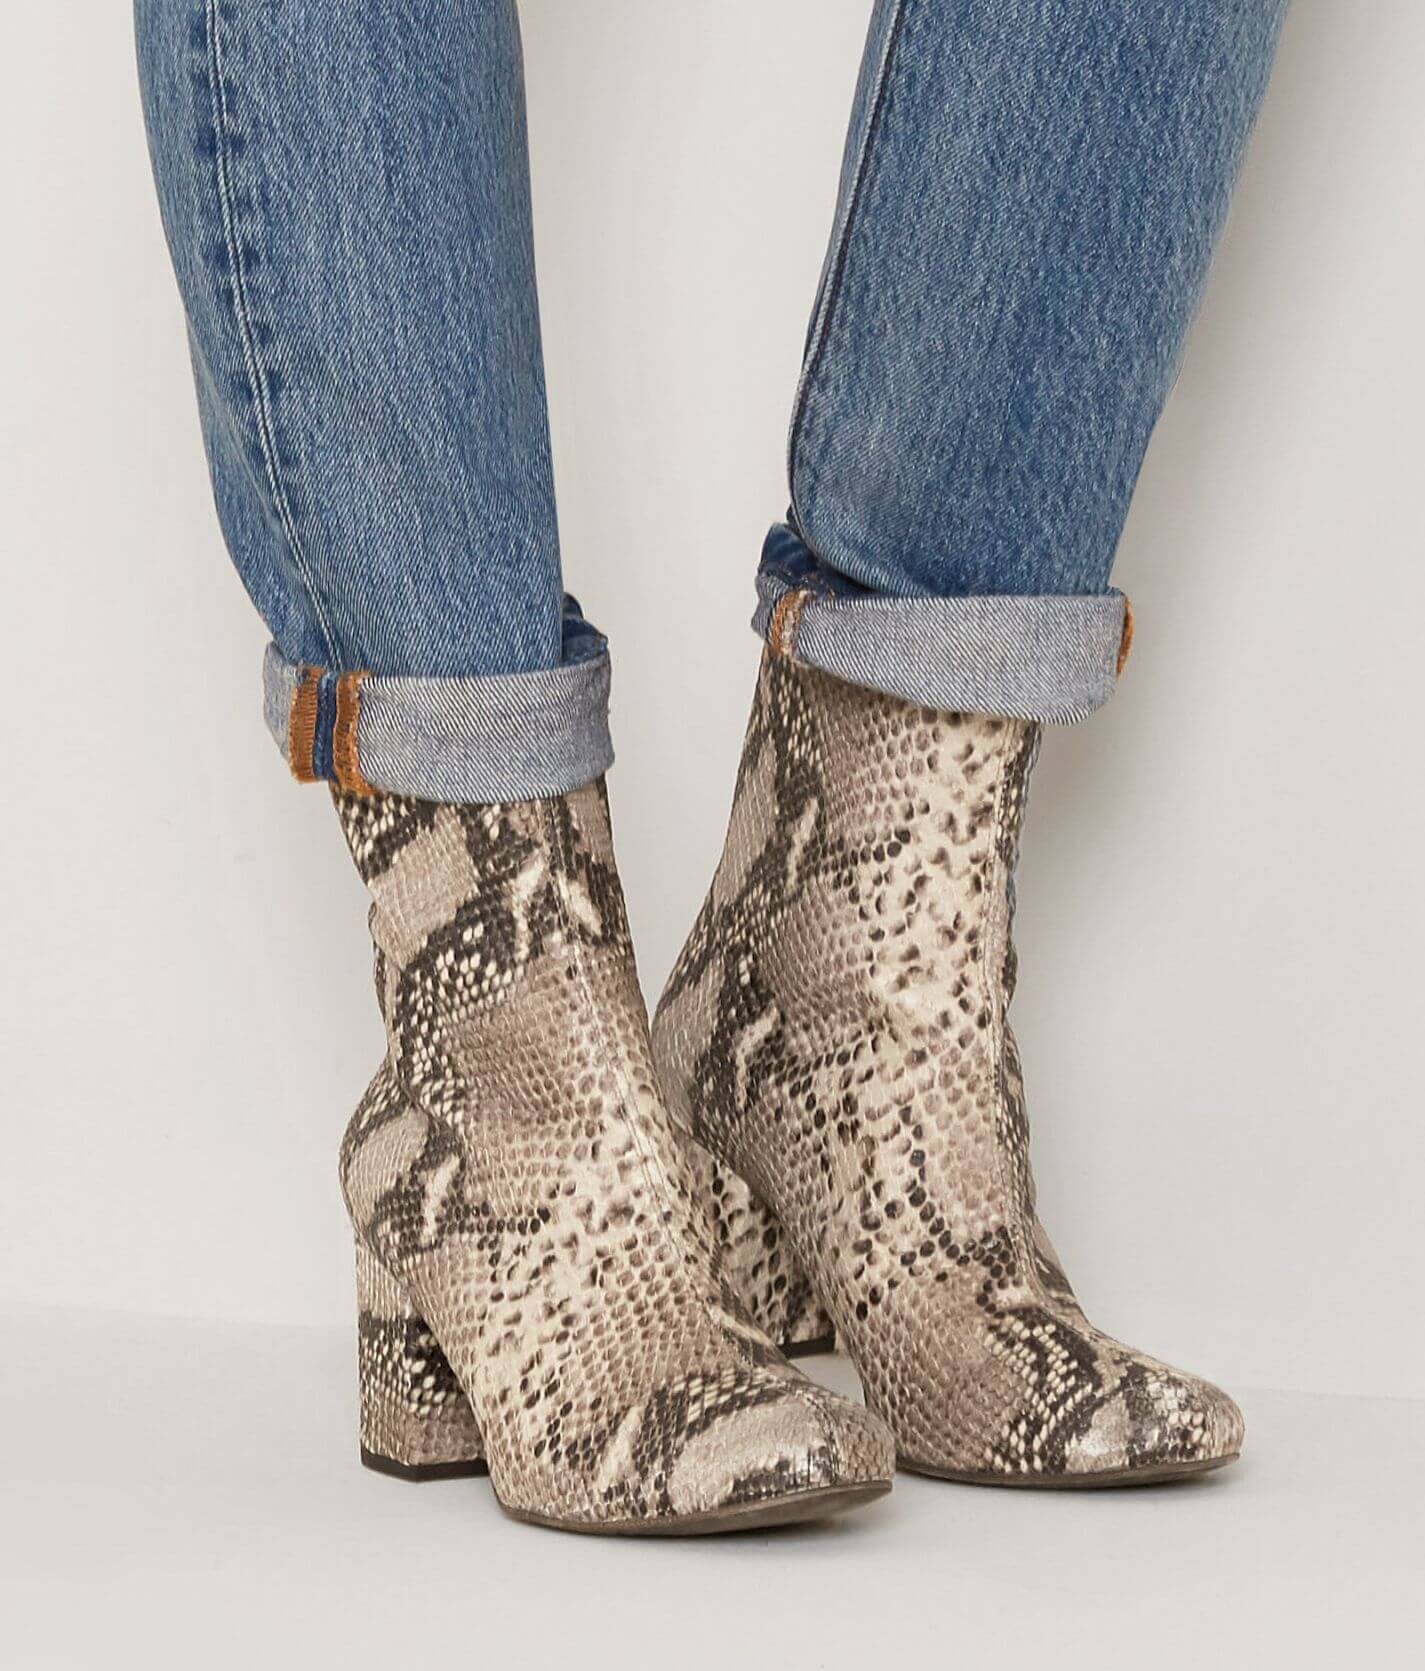 Free People Cecile Ankle Boot - Women's Shoes in Tan Snake